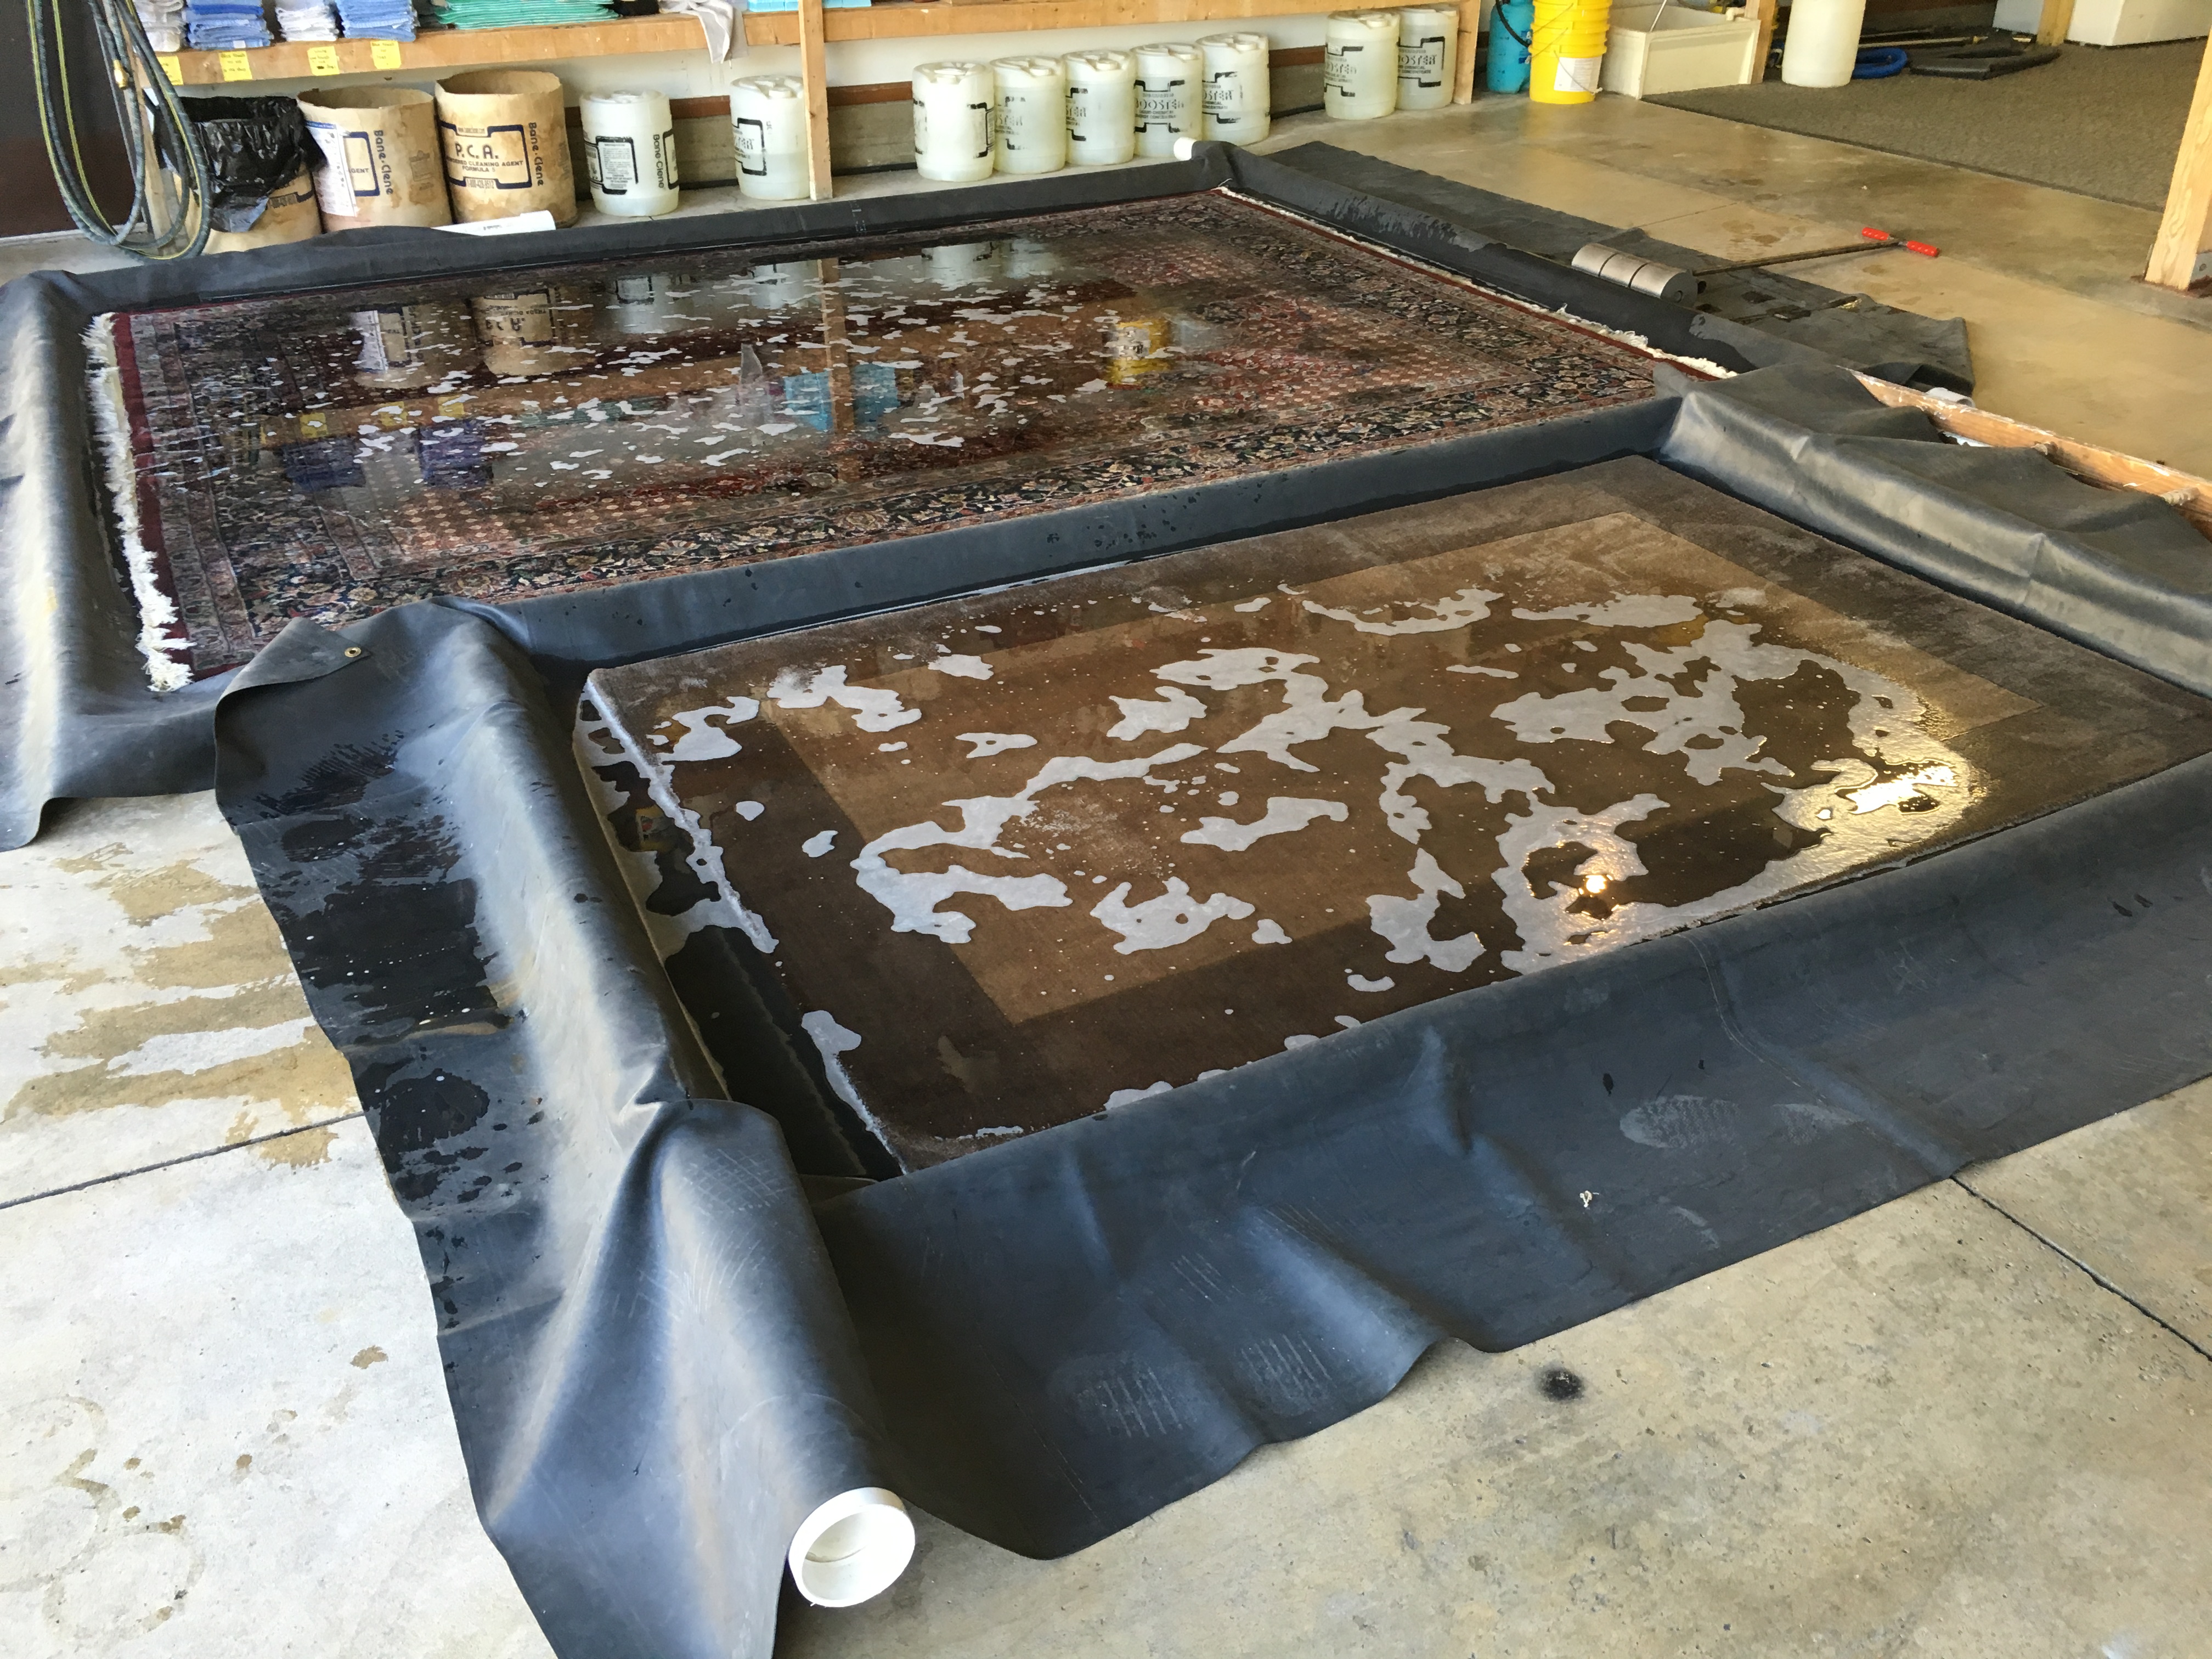 Full Immersion Rug Soaking to Remove Odors